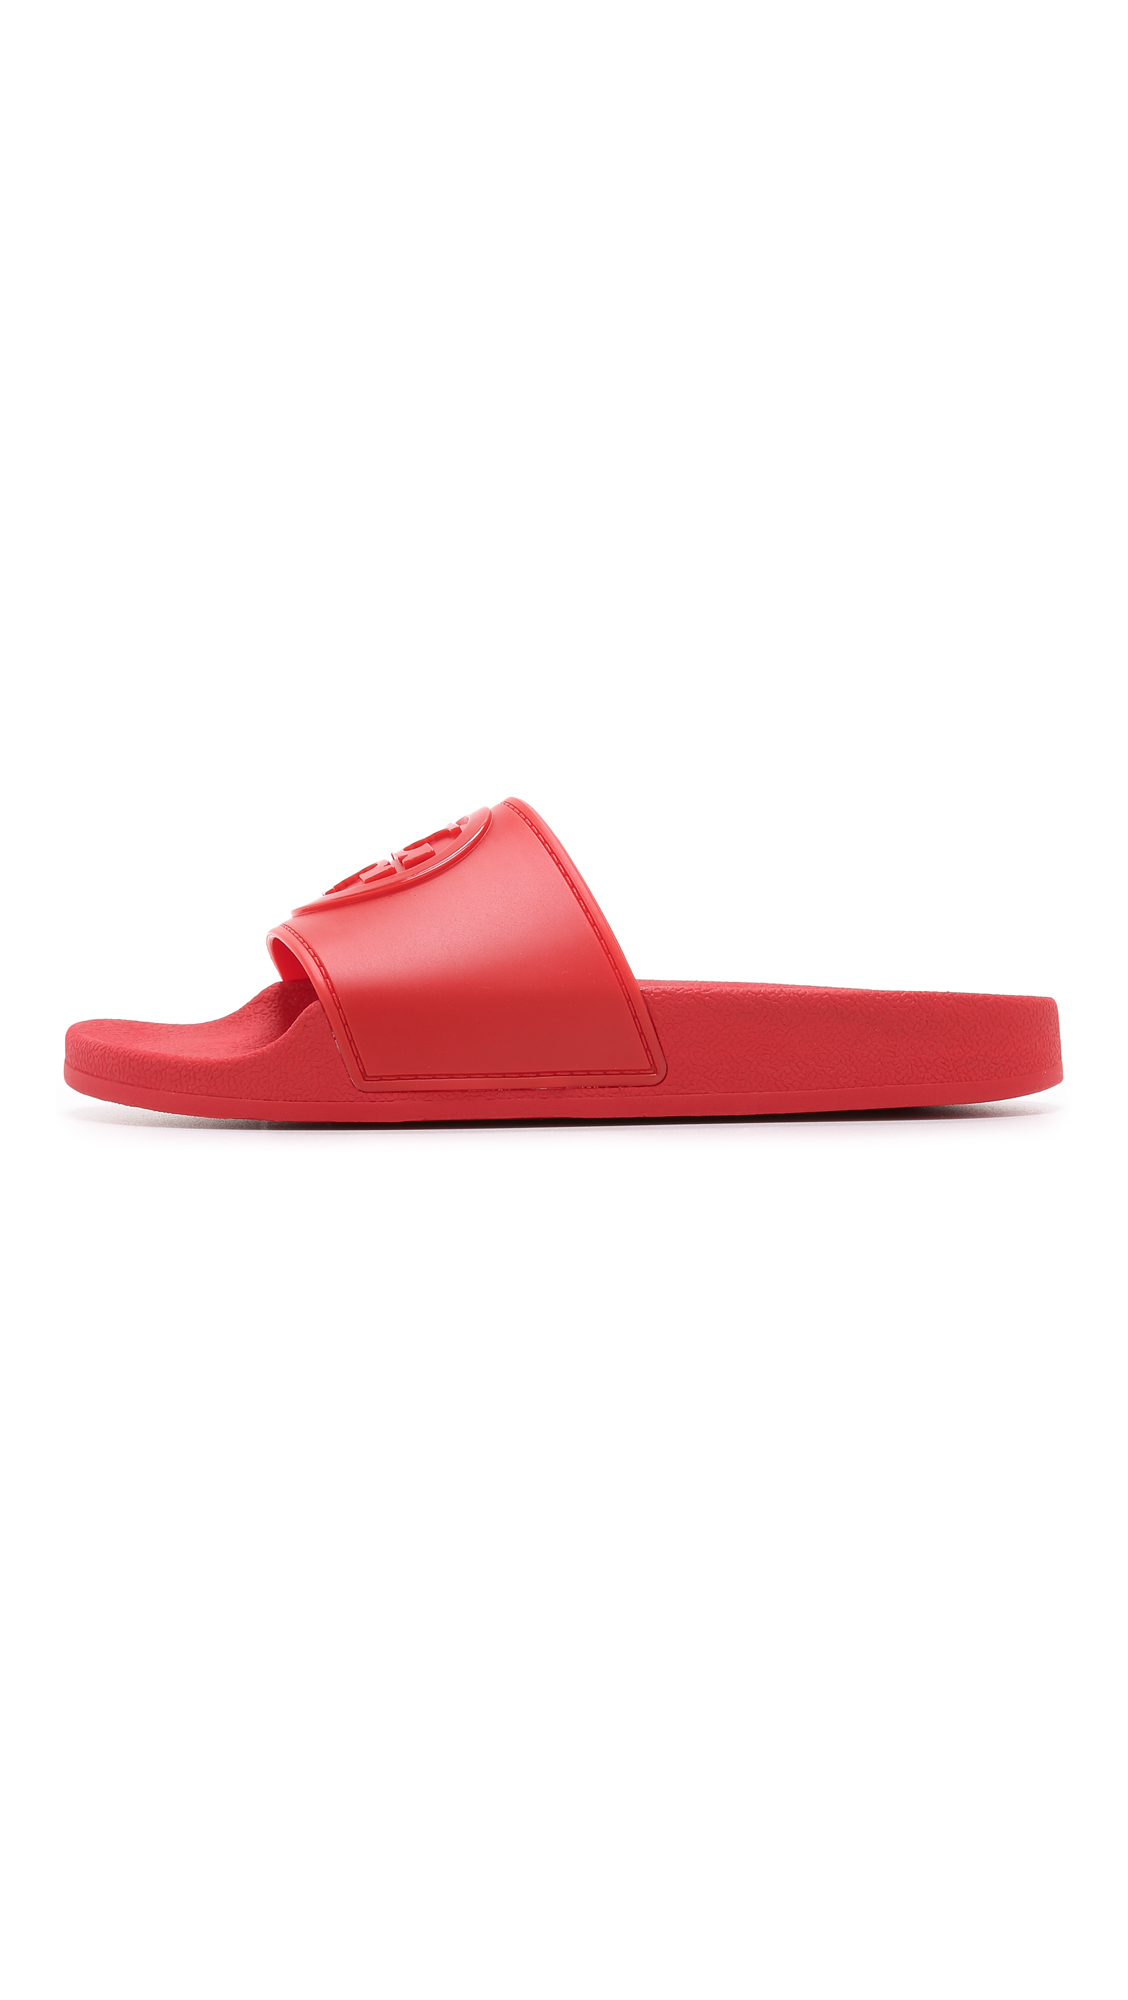 Lyst - Tory Burch Jelly Flat Slides in Red